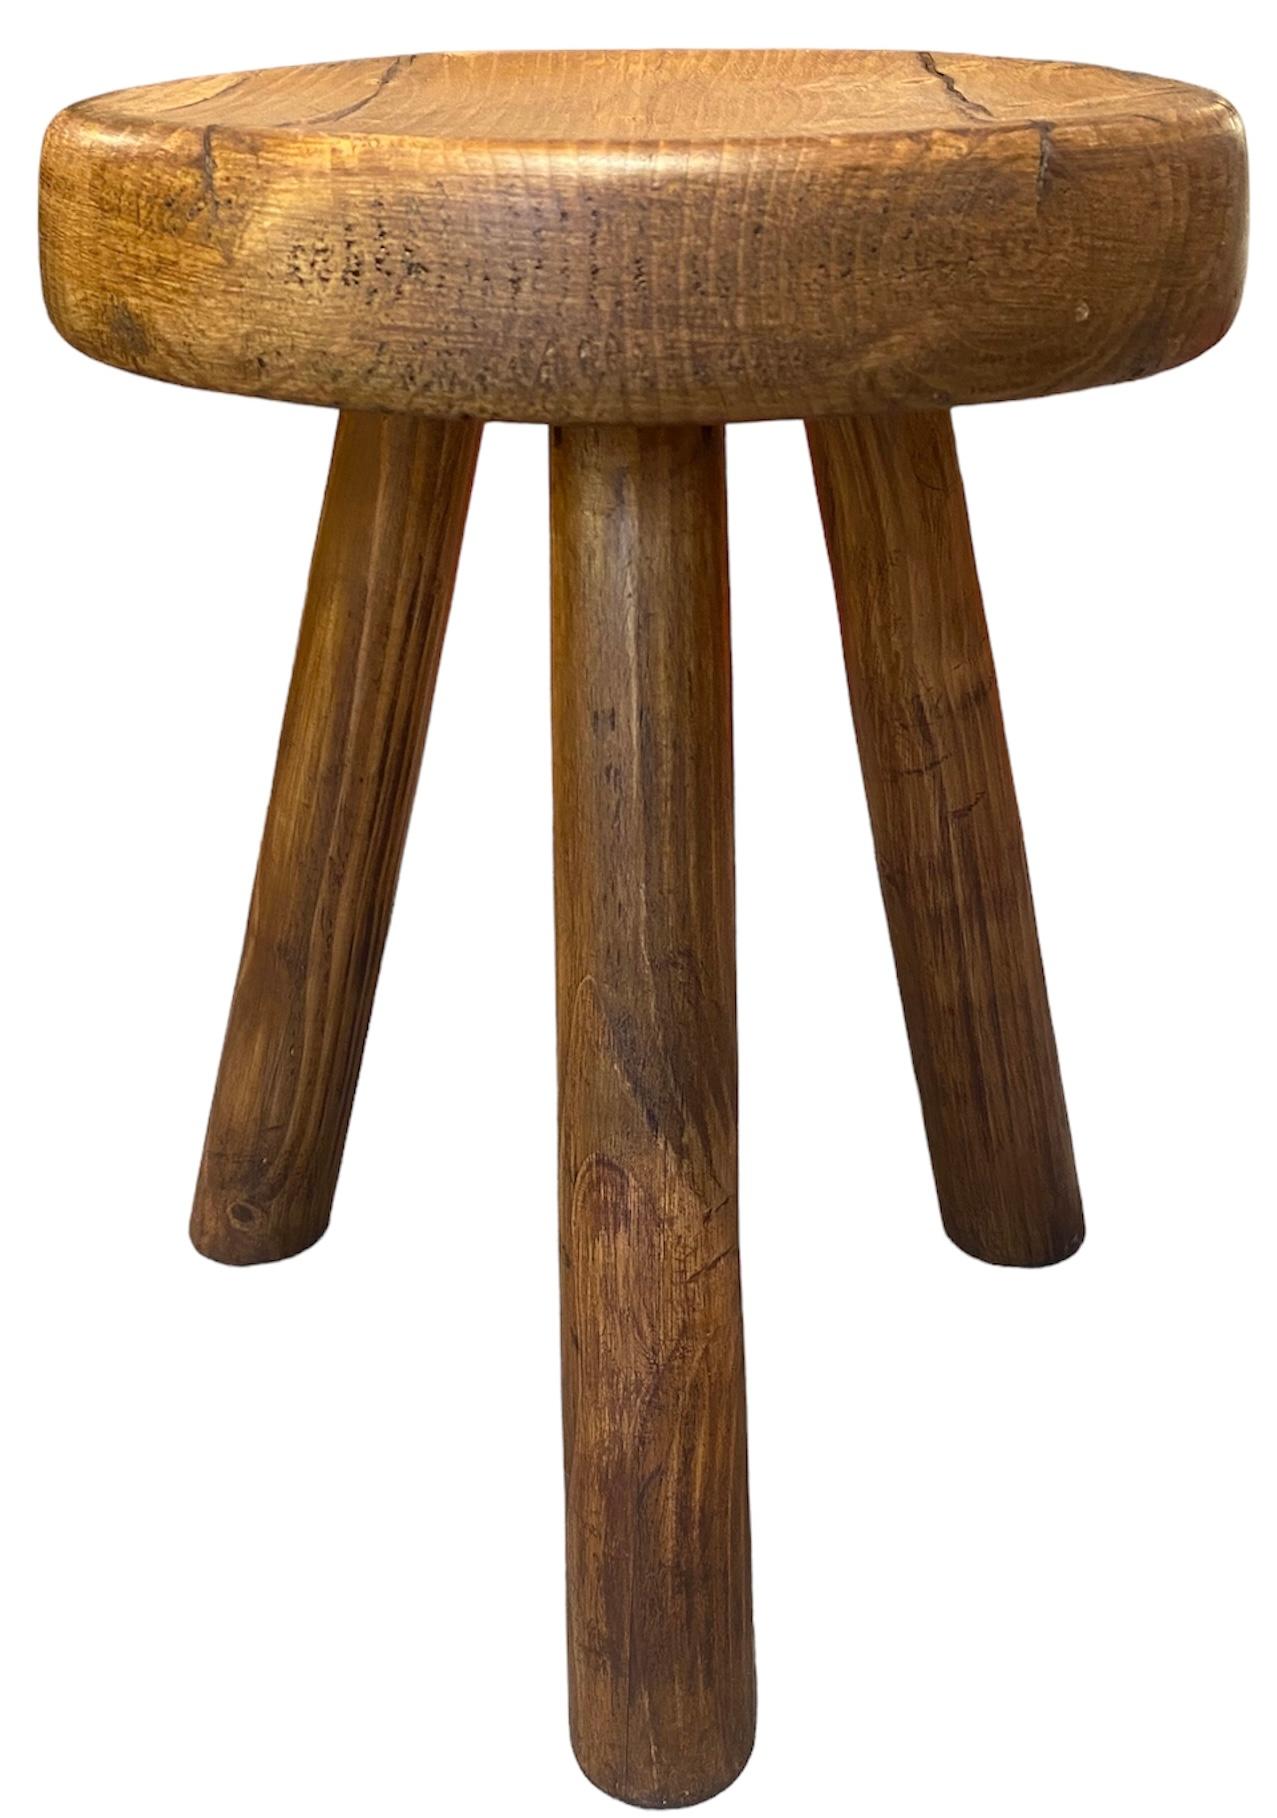 Pine tripod stool by Charlotte Perriand - Les Arcs 
Dimensions: h45xø30cm
Circa 1960
Ref: 4306/18
Price : 2700€ for this stool

Charlotte Perriand (1903 - 1999) is one of the major actors of the French modernism. Together with Le Corbusier,